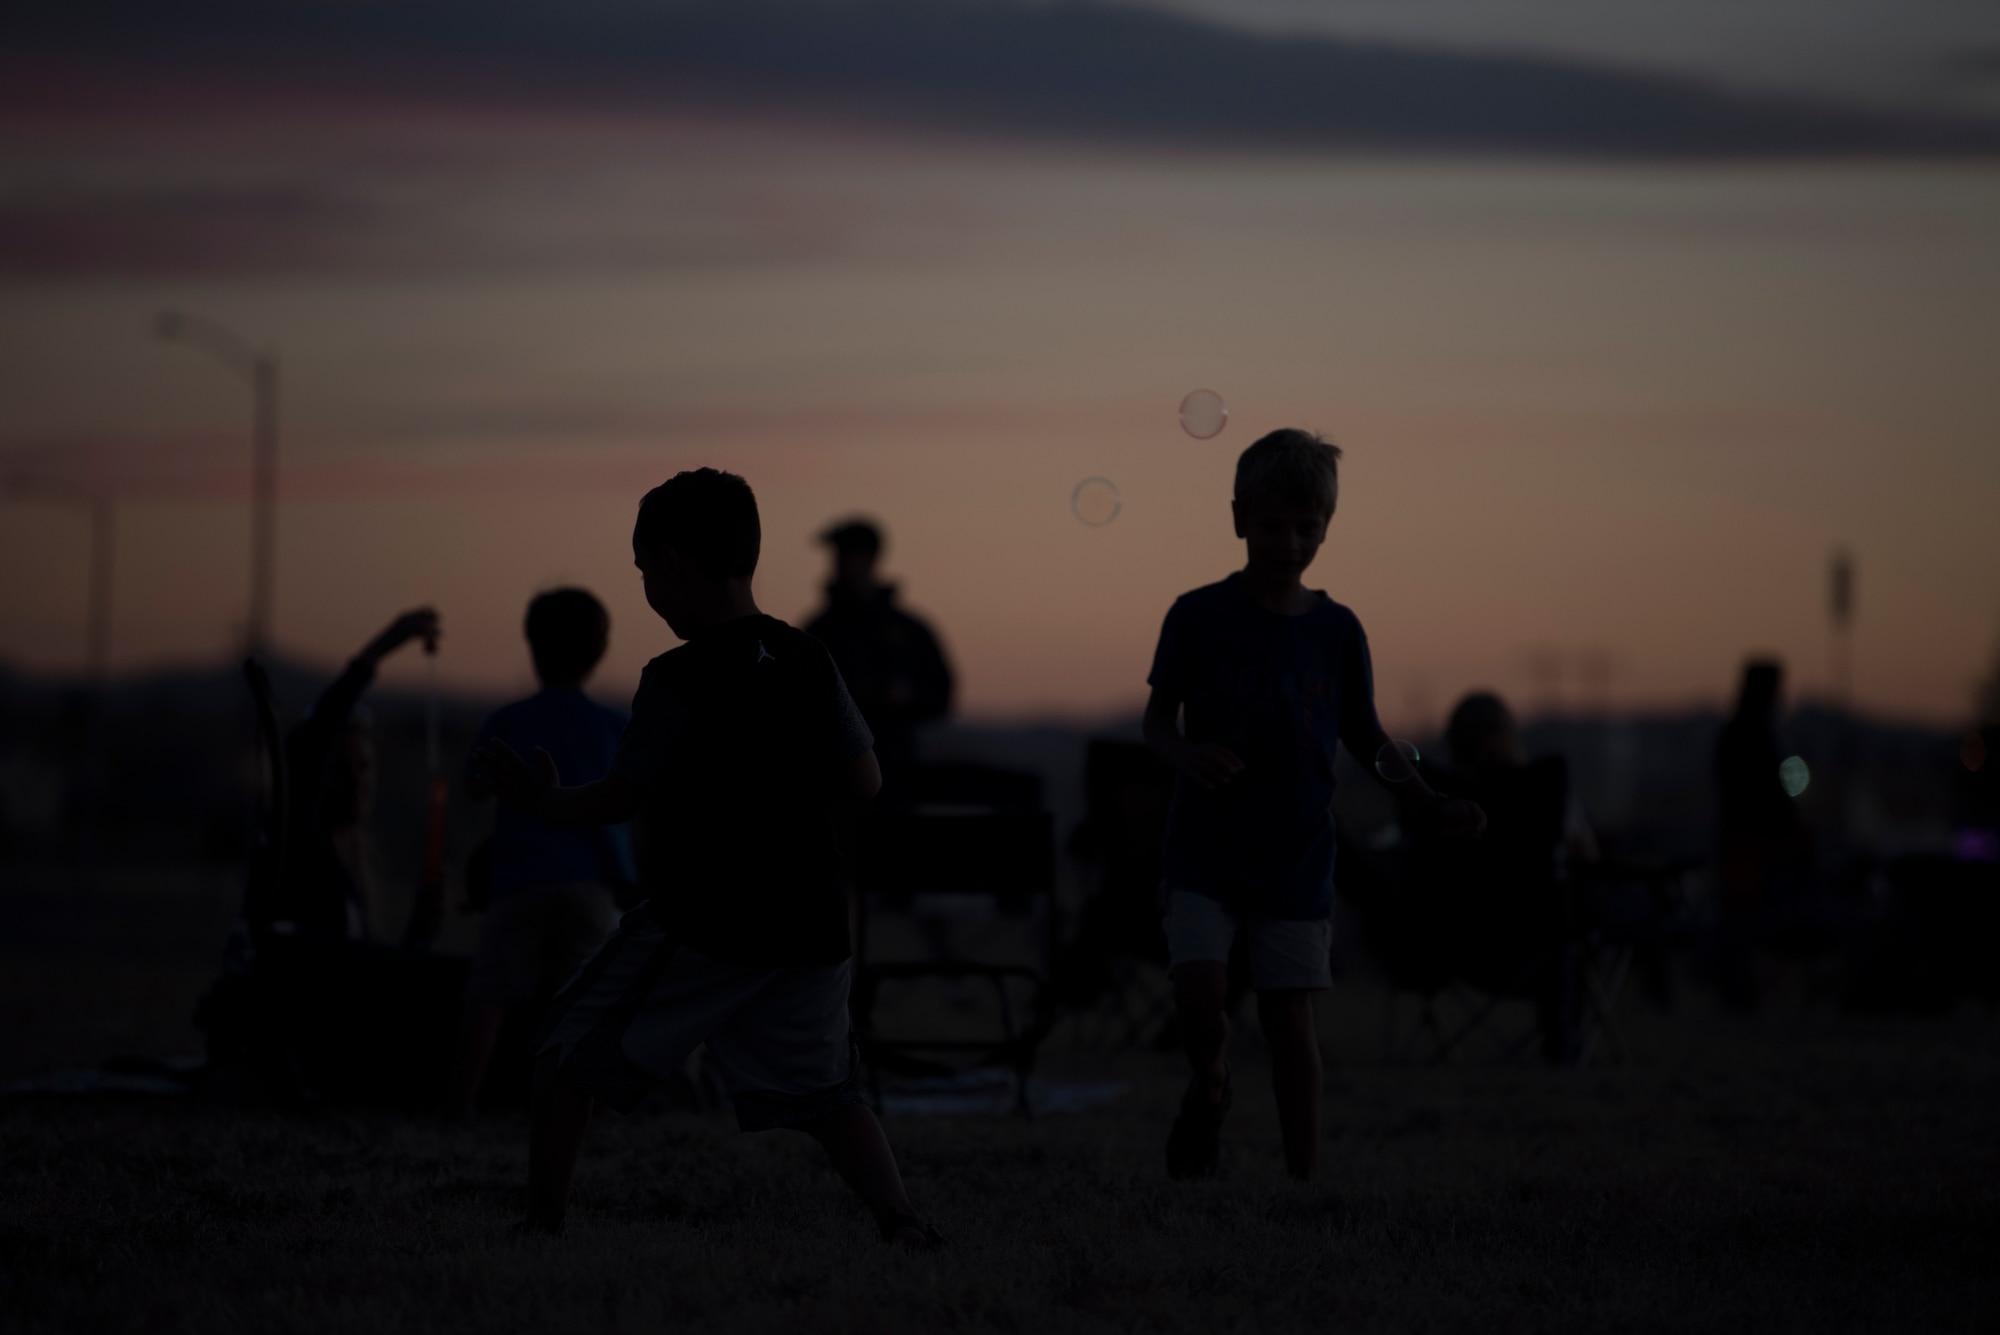 Children play with bubbles prior to an Intel drone light show at Travis Air Force Base, Calif., July 5, 2018. The event featured numerous activities including music, bounce houses and an eight minute light show with 500 drones. (U.S. Air Force photo by Tech. Sgt. James Hodgman)